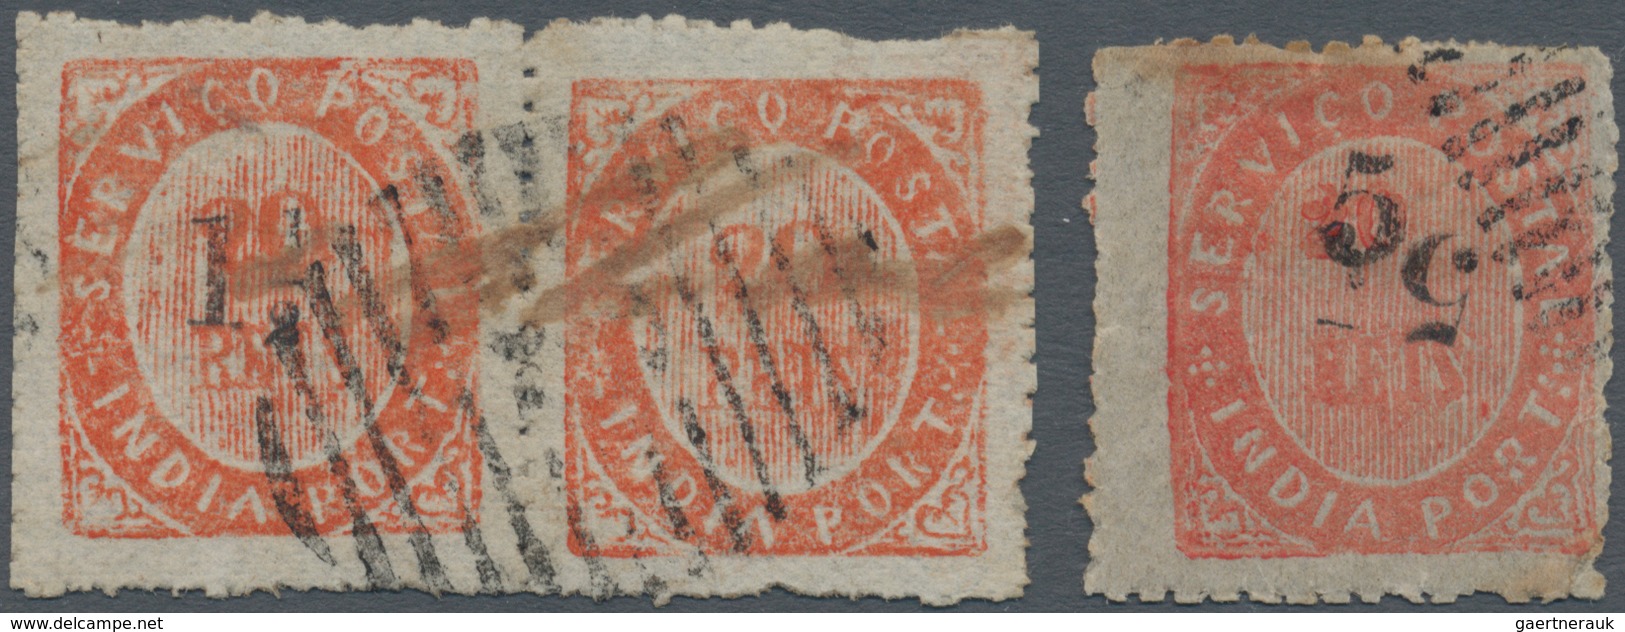 00448 Portugiesisch-Indien: 1881, Types/tipos;1 1/2 R.on 20 R. (MF 63) Used: IA, A Horizontal Pair With Po - Portugiesisch-Indien